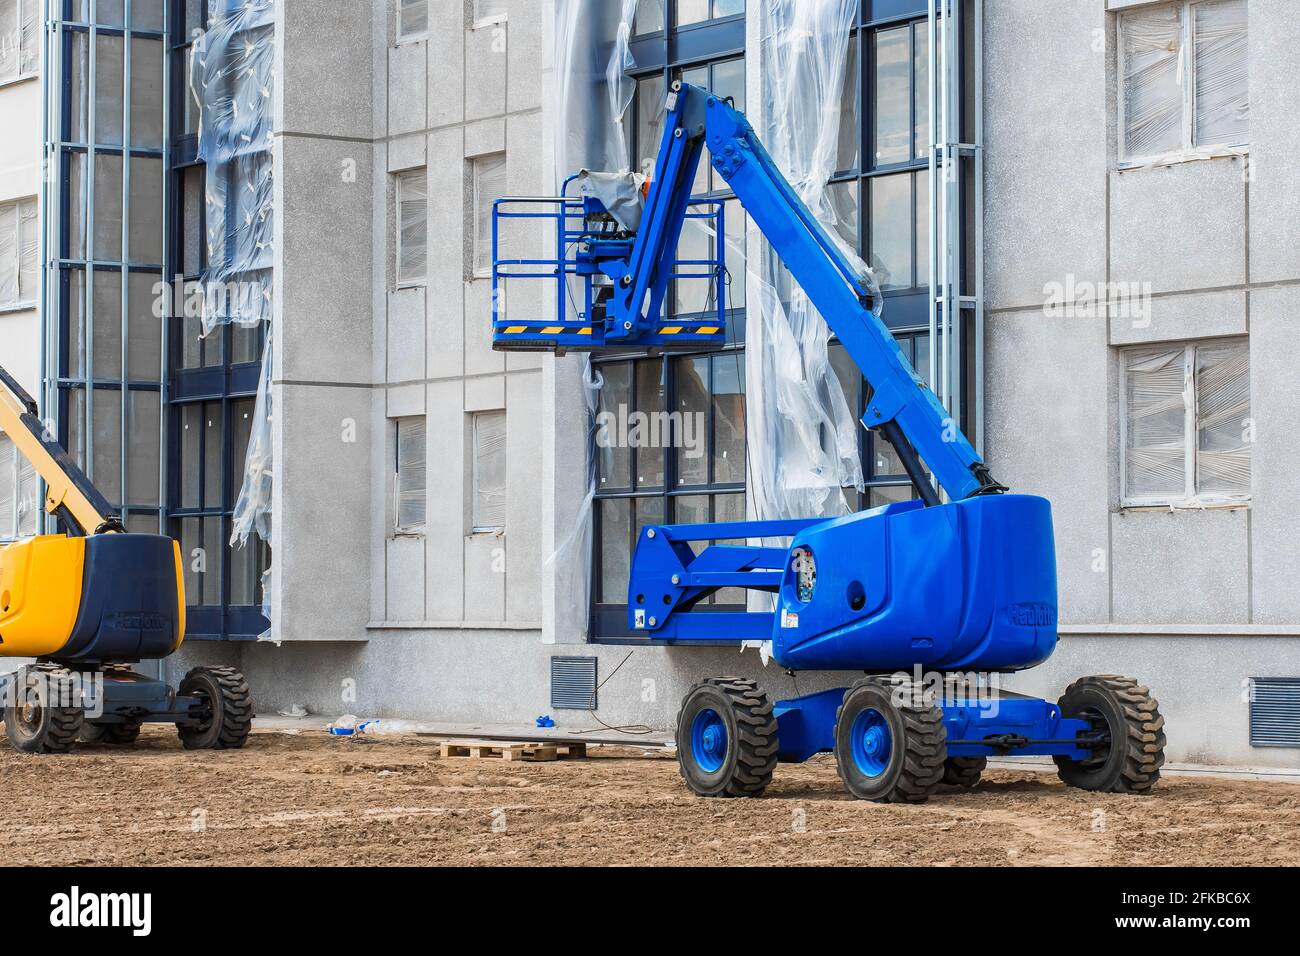 Belarus, Minsk - May 28, 2020: Industrial vehicle with lifting platform against the background of a new modern building under construction at a constr Stock Photo